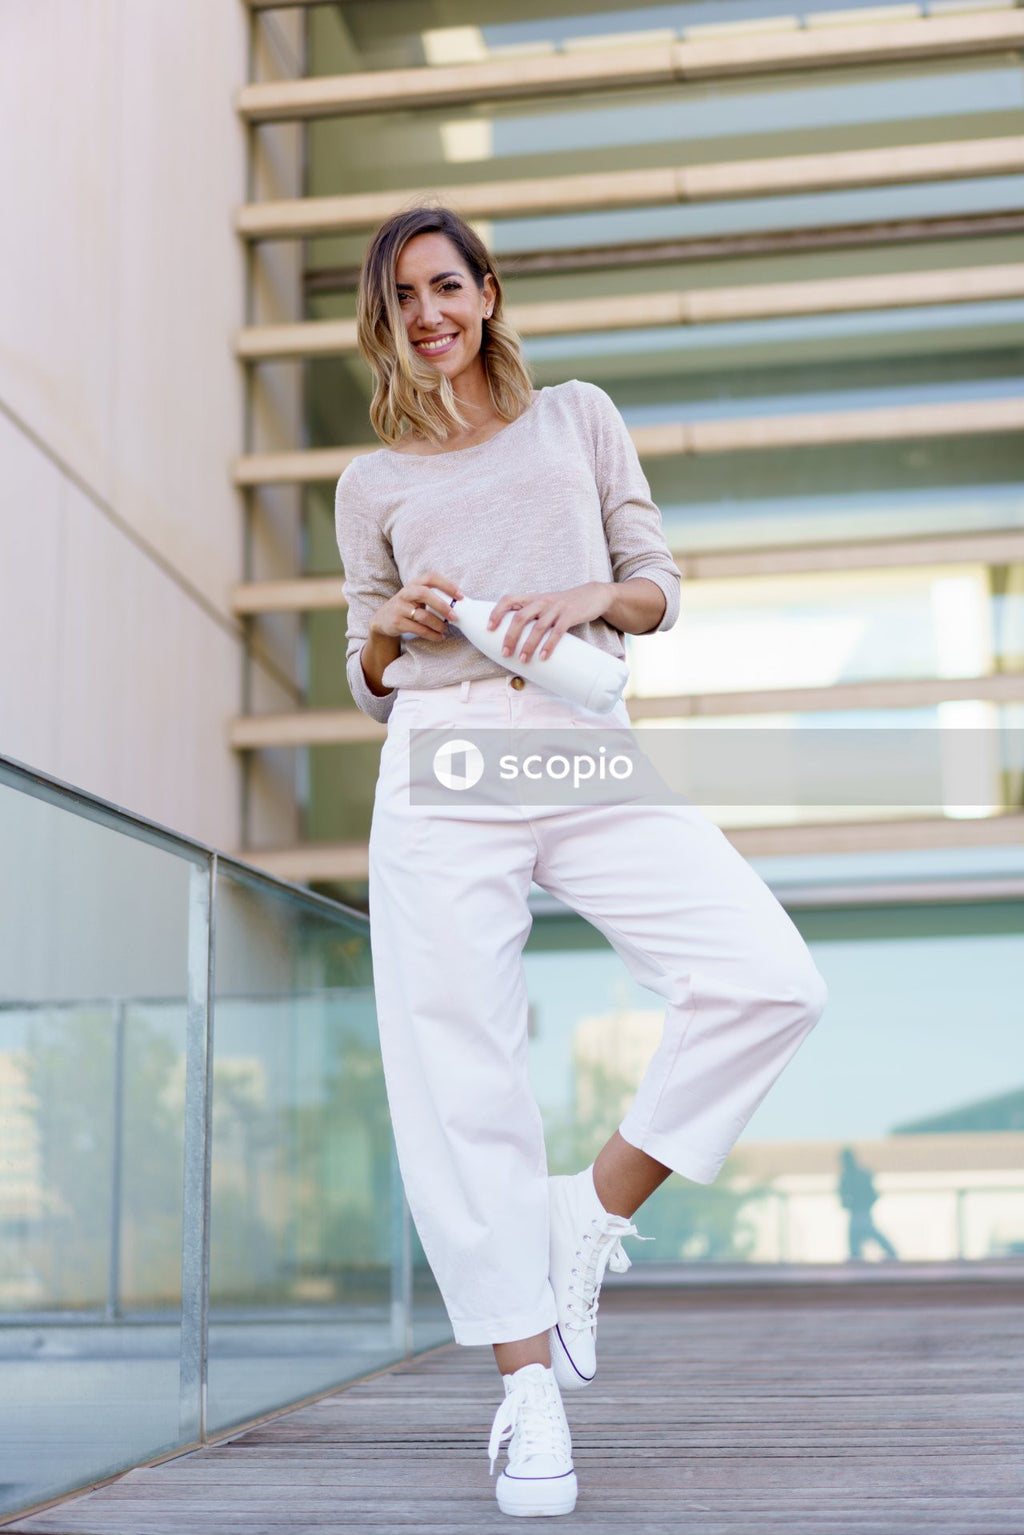 Woman in white long sleeve shirt and white pants standing on white staircase